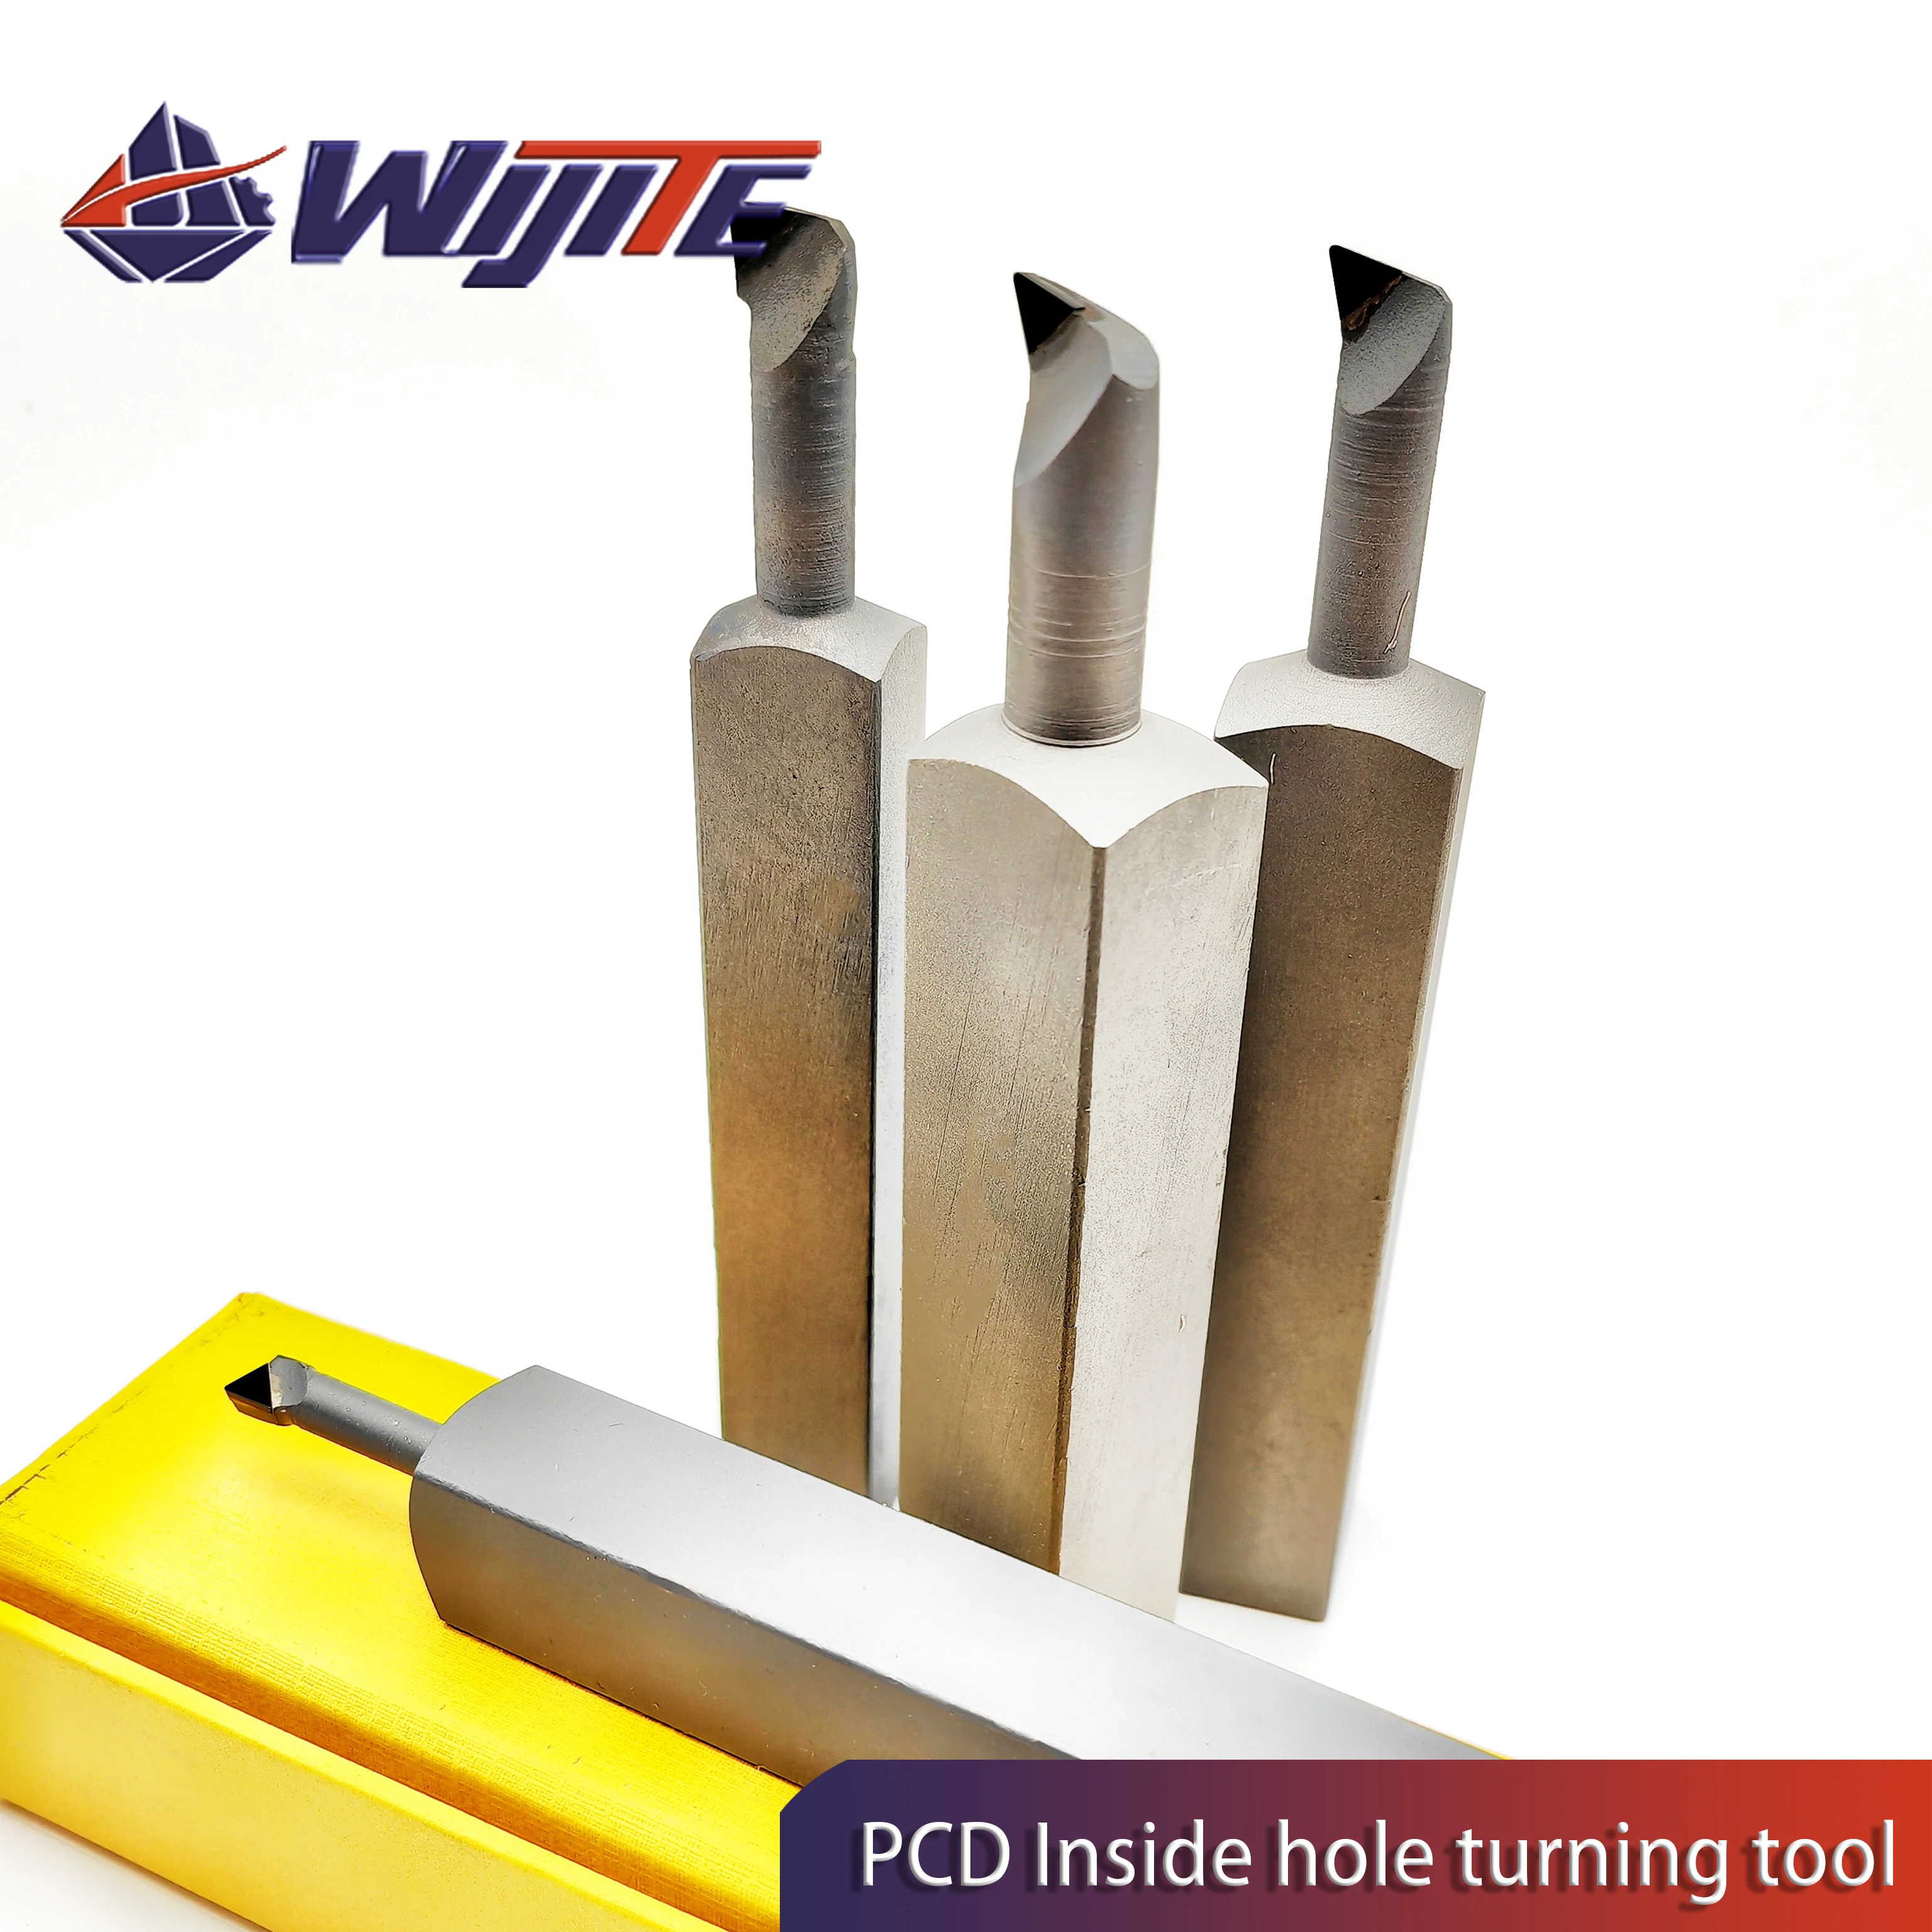 

PCD inner hole turning tool is used for processing non-ferrous metals such as copper and aluminum with high finish